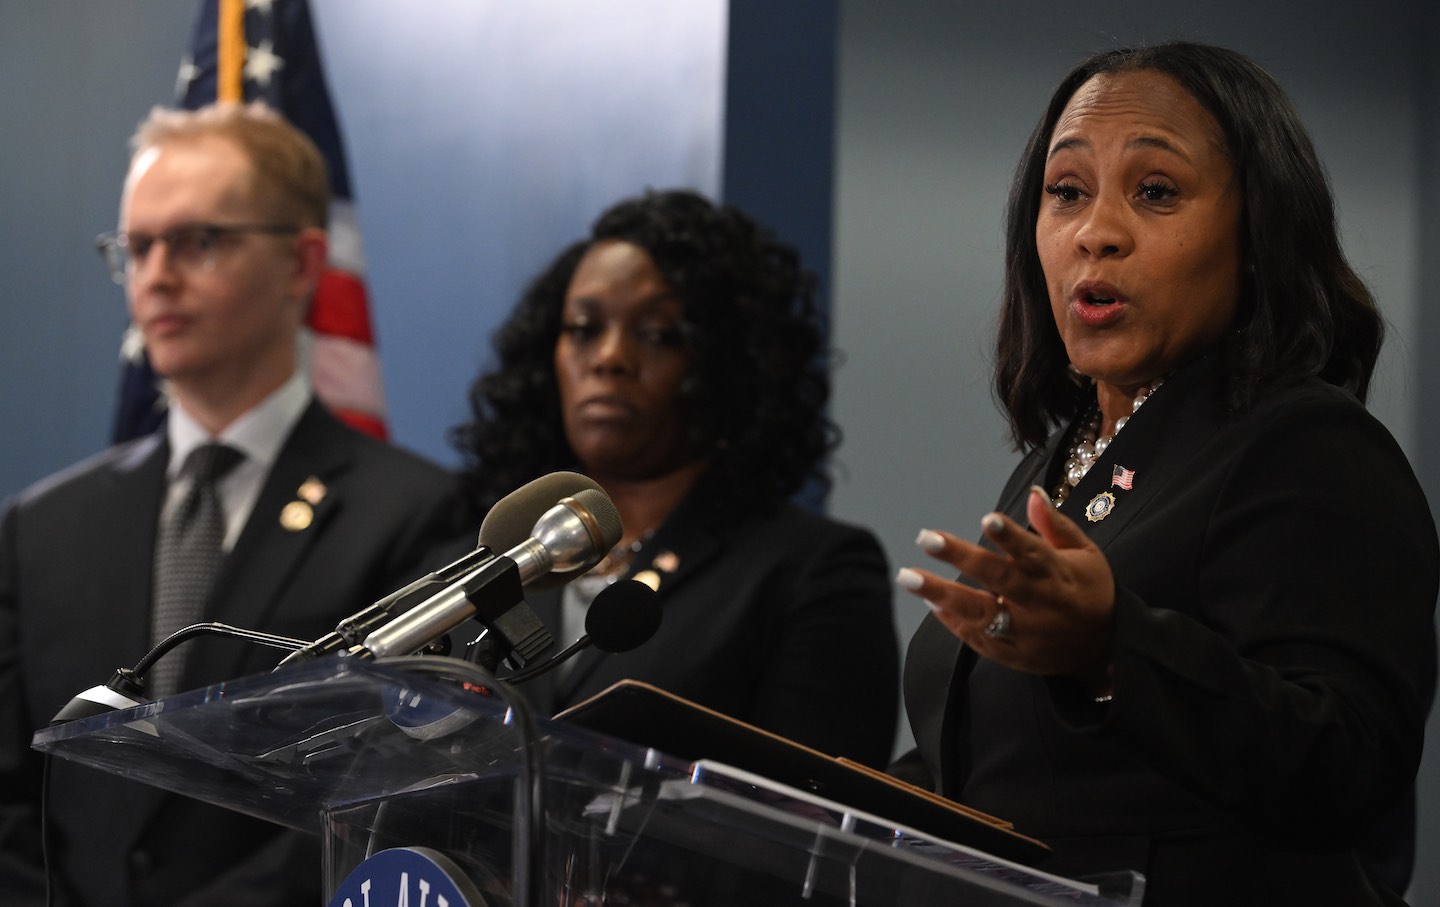 Fulton County District Attorney Fani Willis Speaks During A News Conference in Atlanta, Georgia